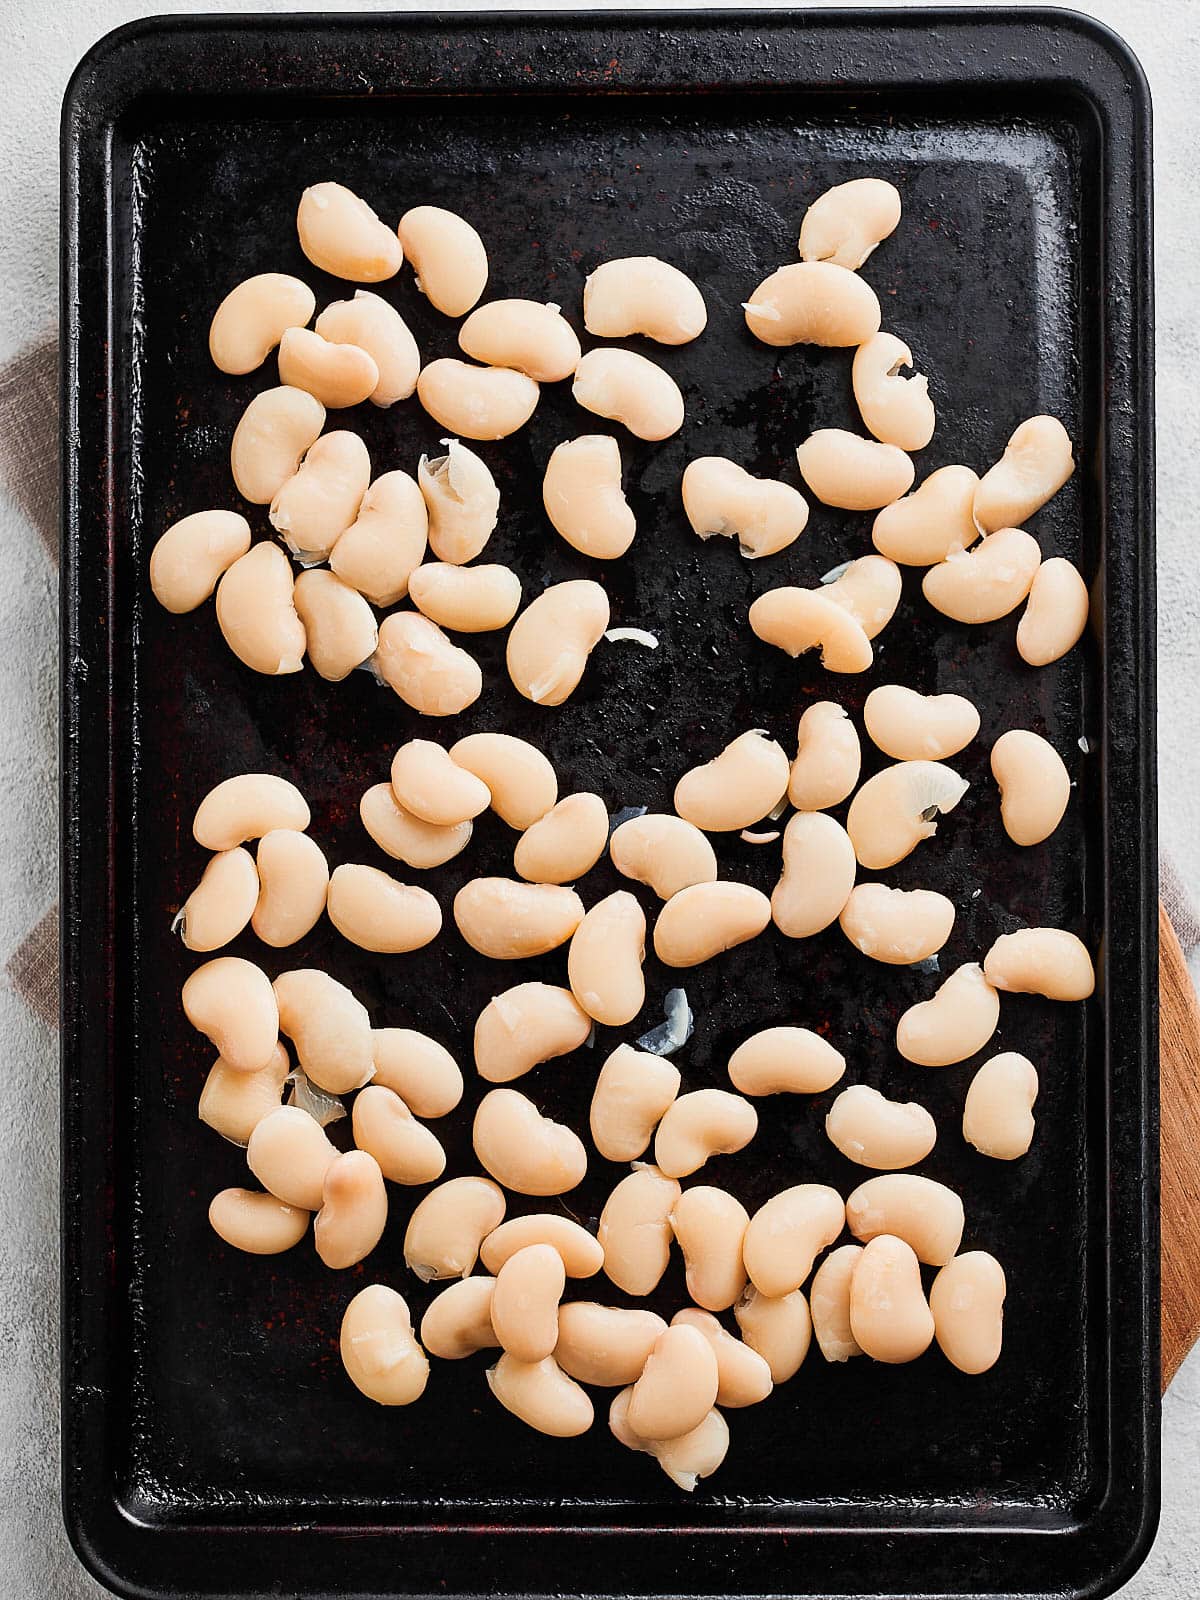 Butter beans on a baking tray